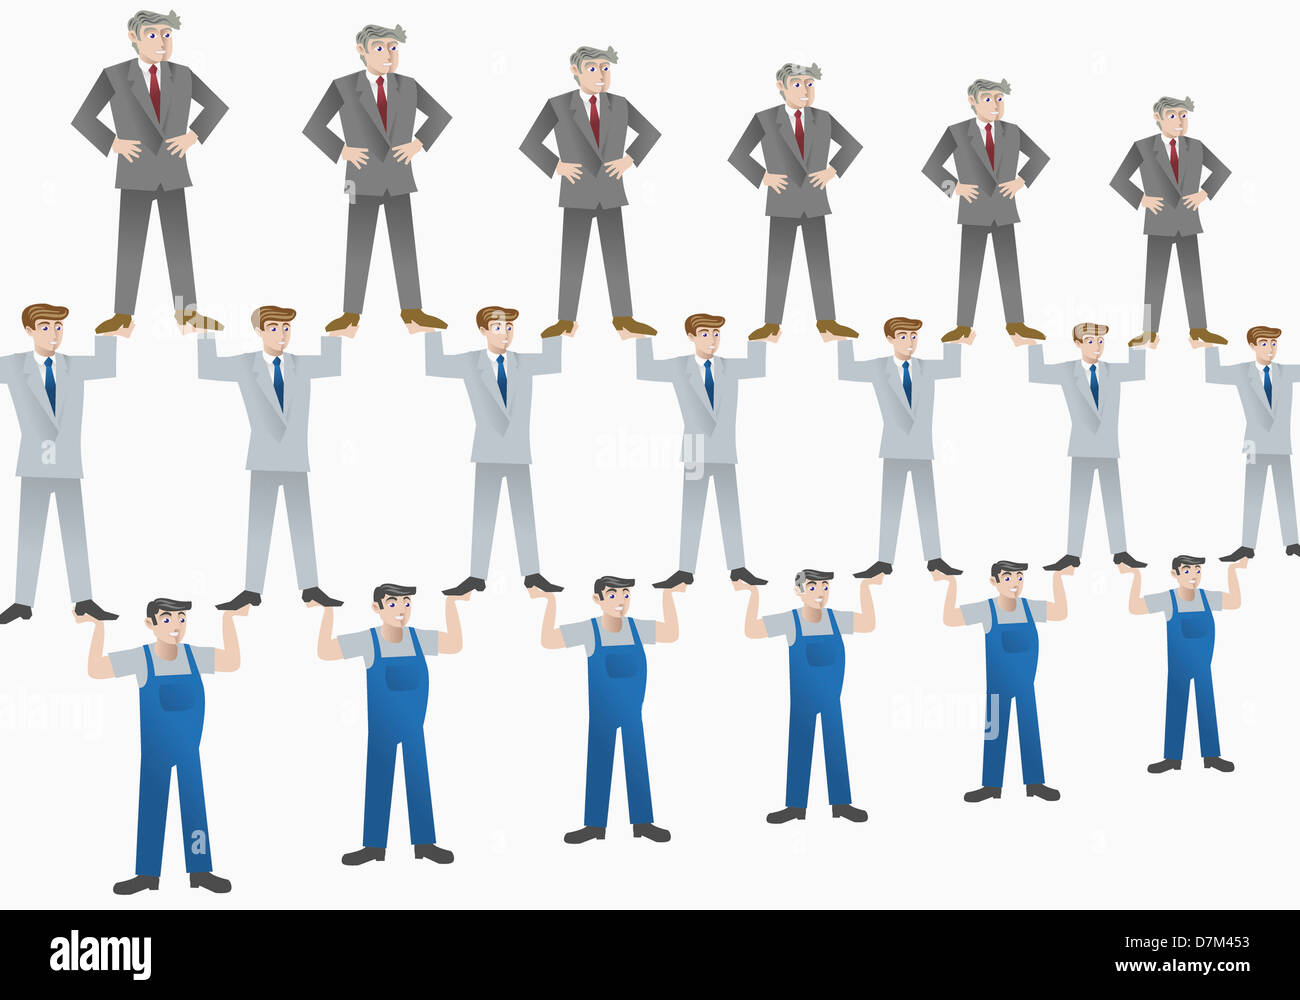 Hierarchy in company against white background Stock Photo